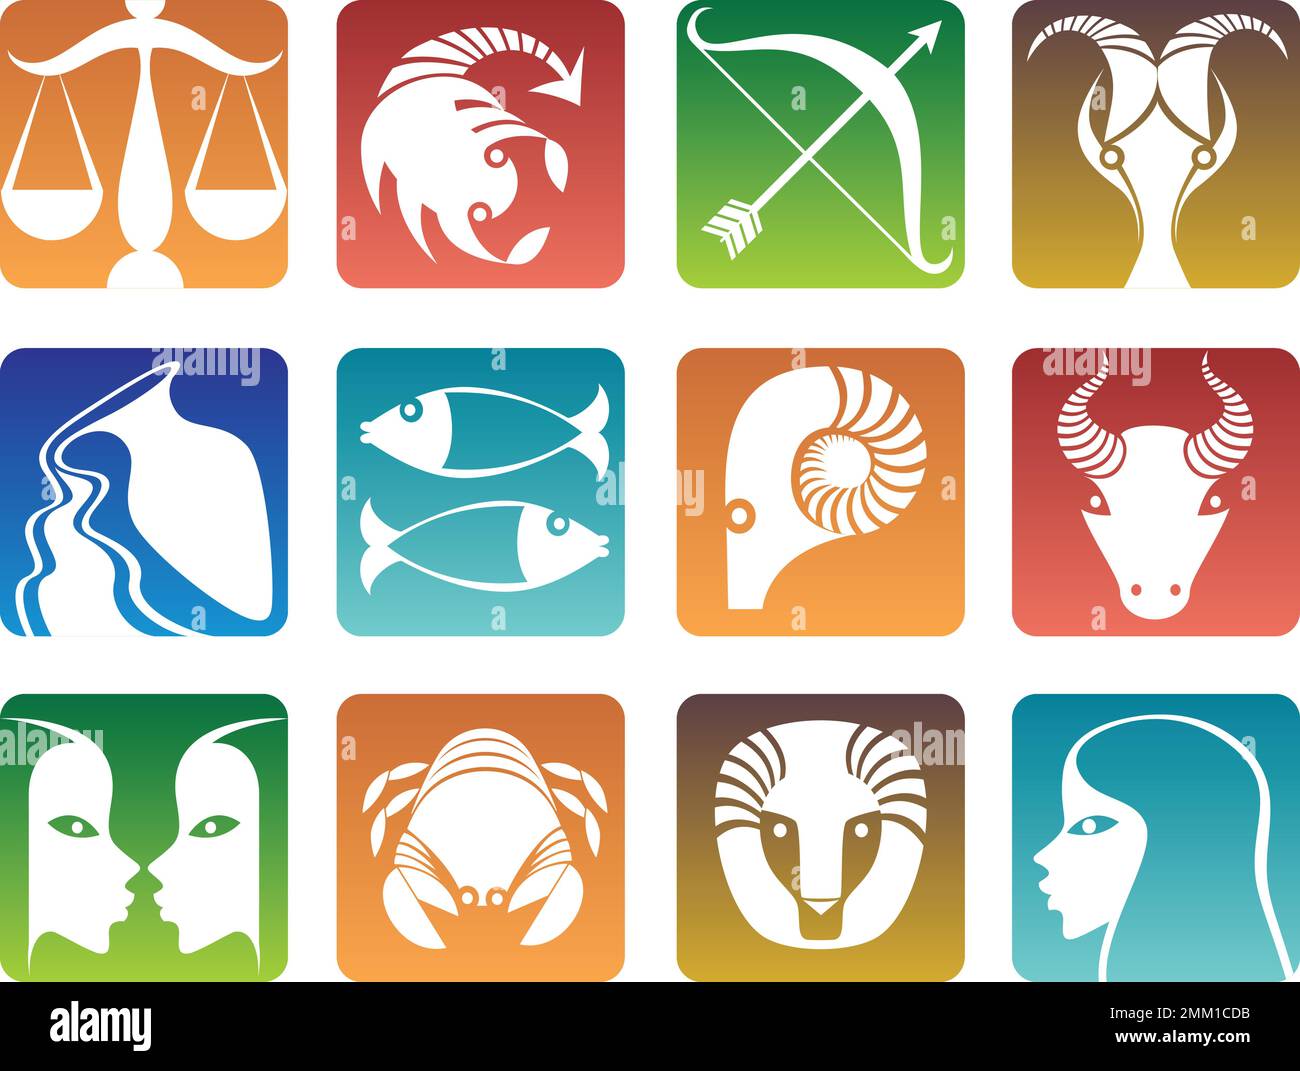 Horoscope icons colorful vector set. Flat illustration Stock Vector